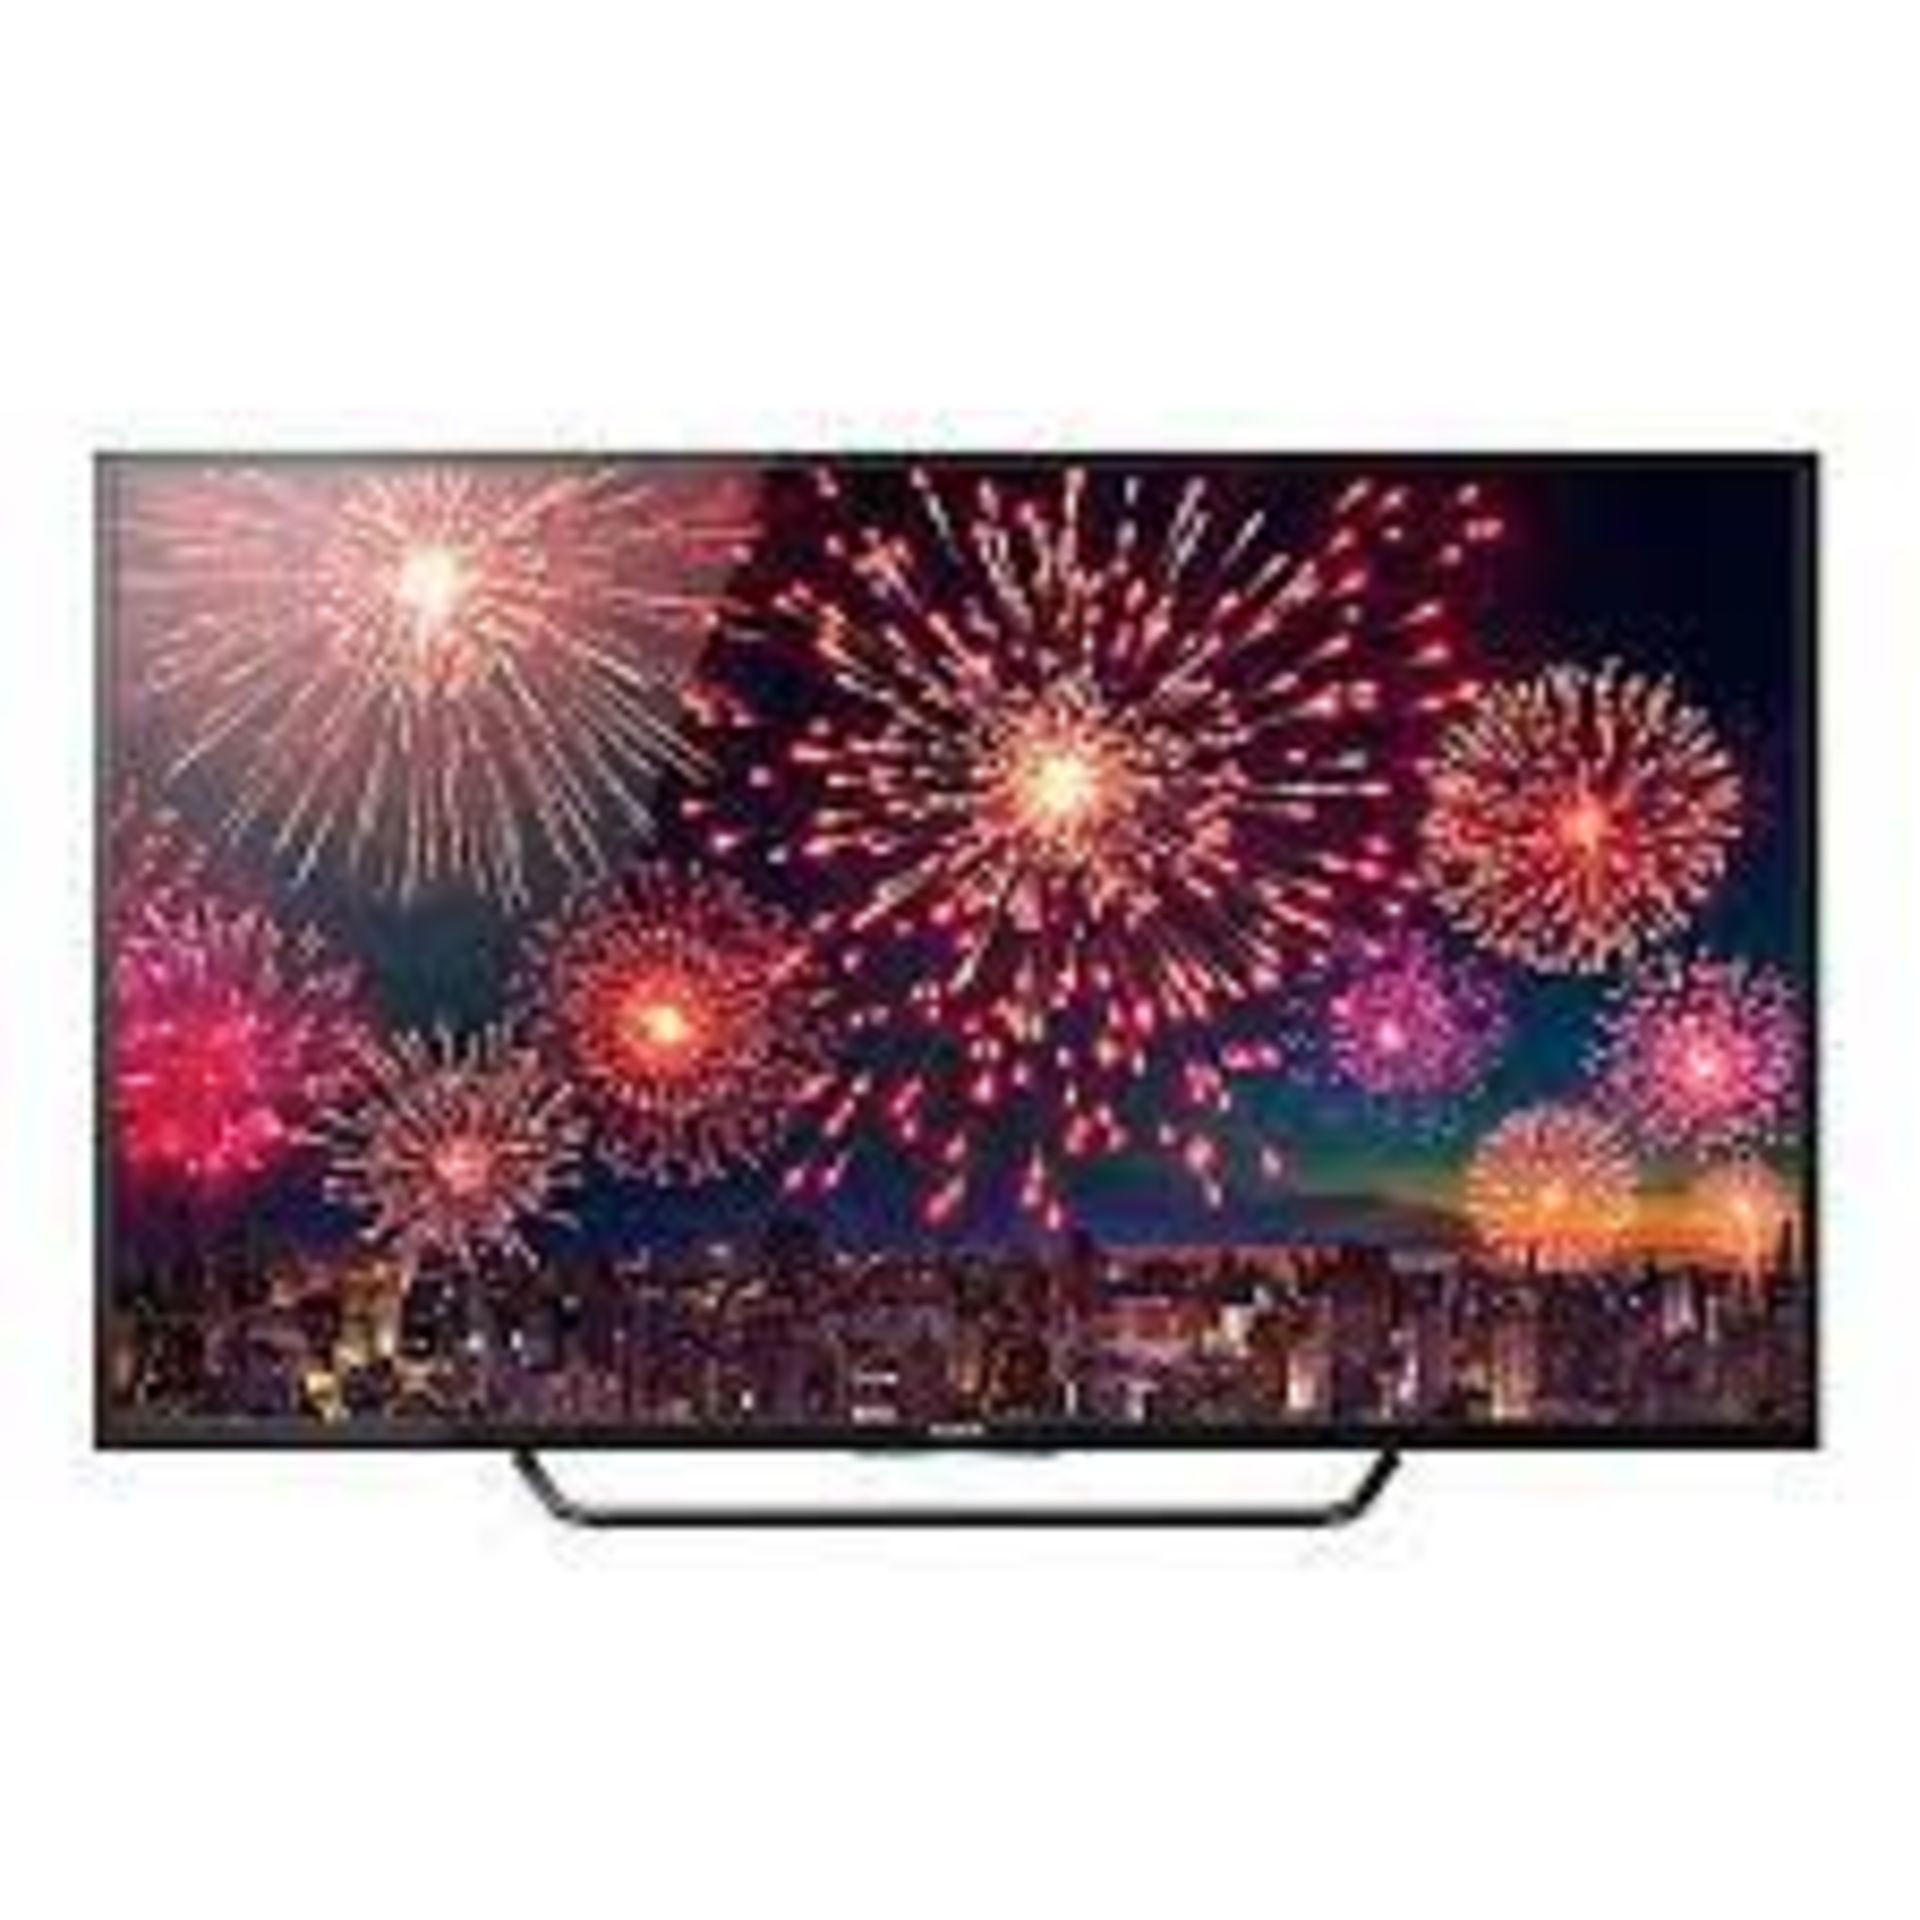 1 SONY KD-55X8005C 55" 4K ULTRA HD ANDROID TV RRP Â£1299 (POWERS ON SCREEN FINE,DOSNT RESPOND TO